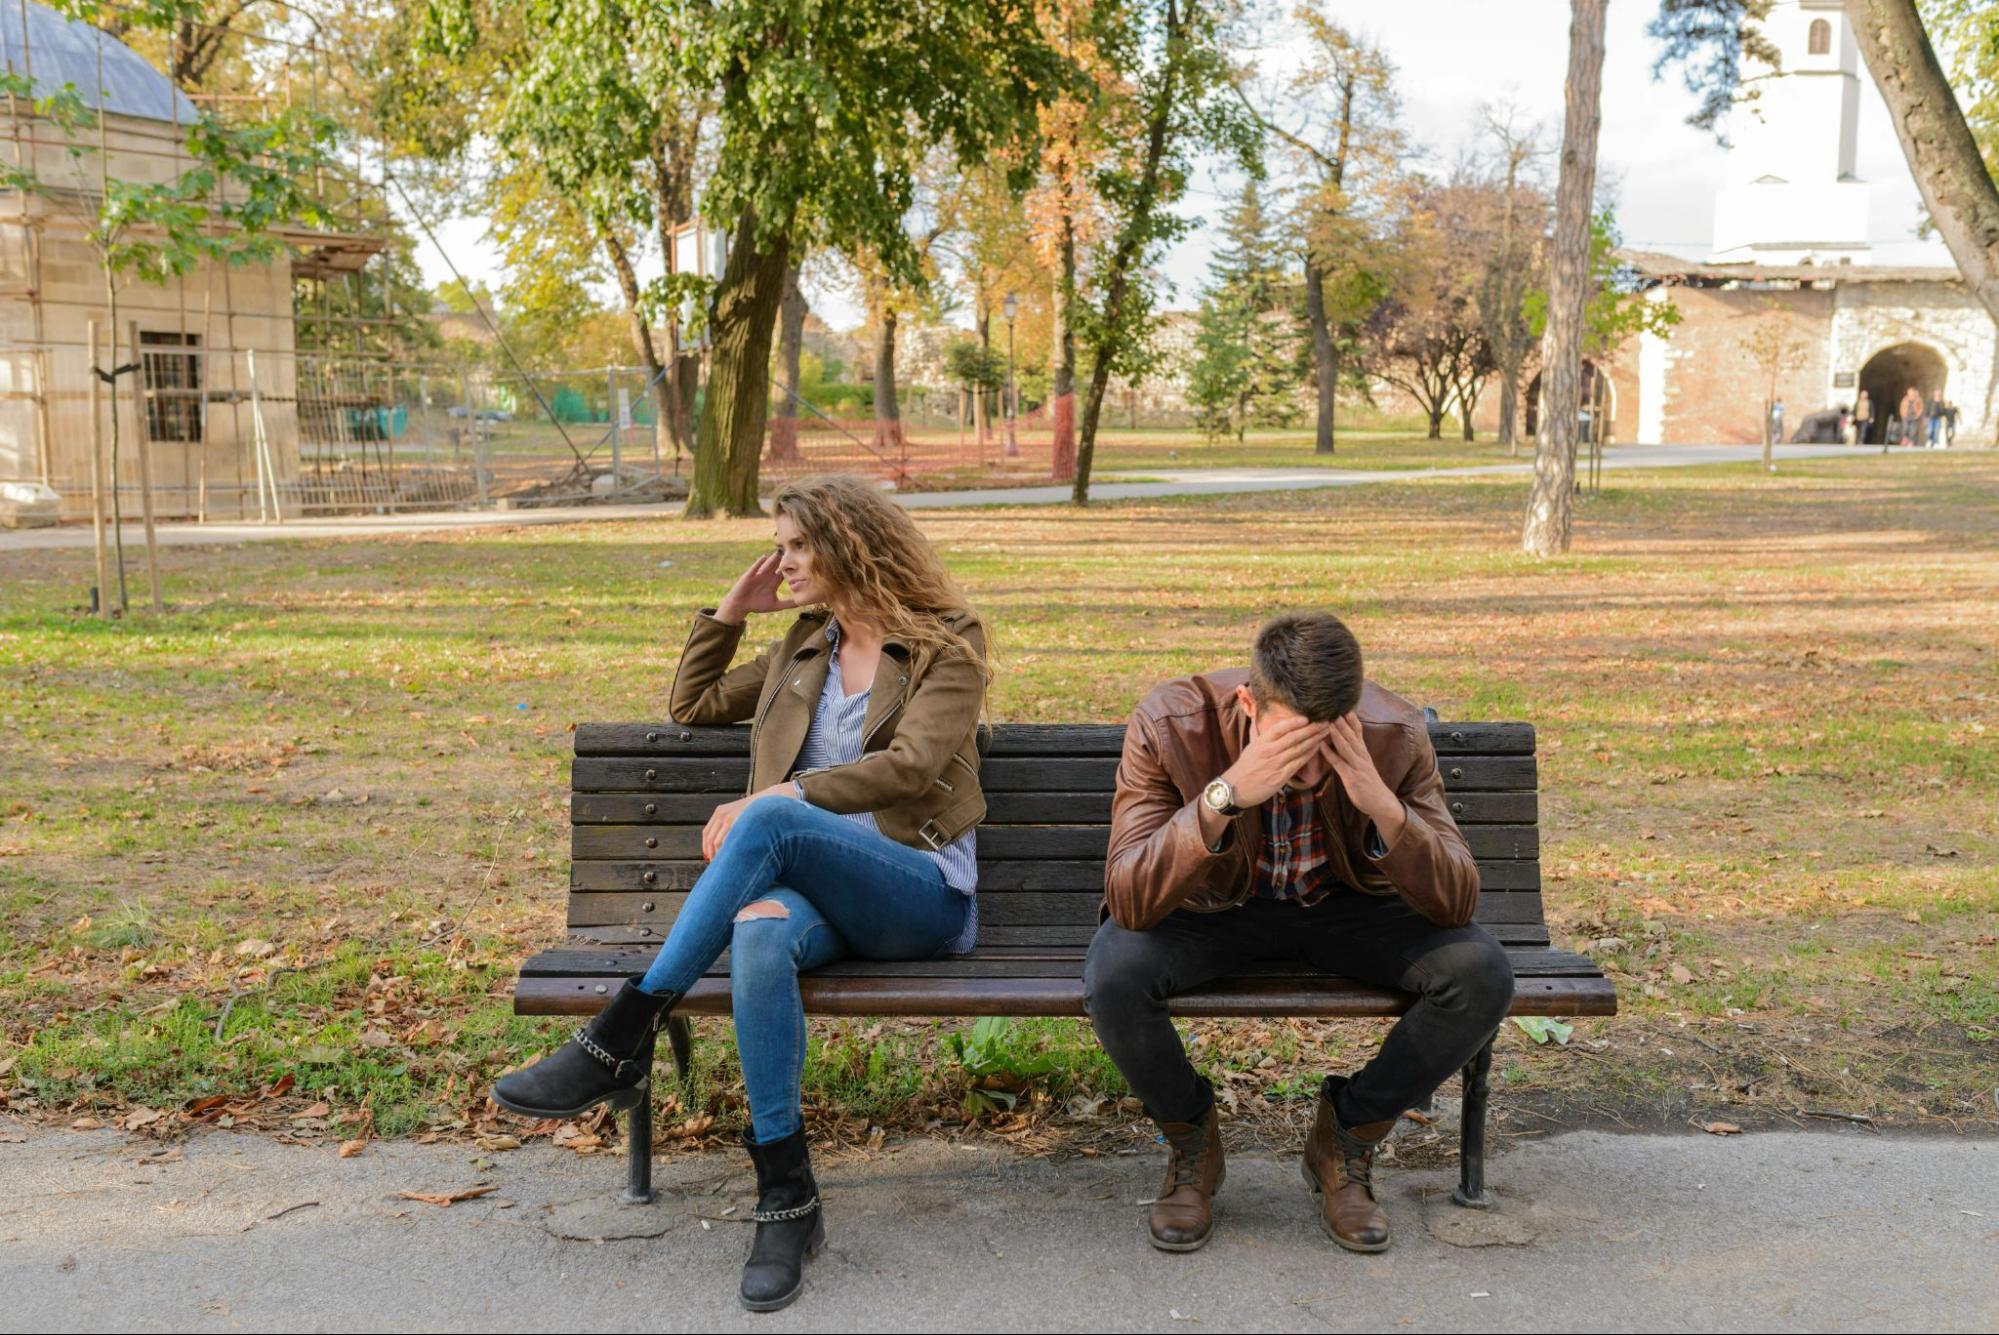 Woman-and-man-upset-sitting-on-brown-wooden-bench